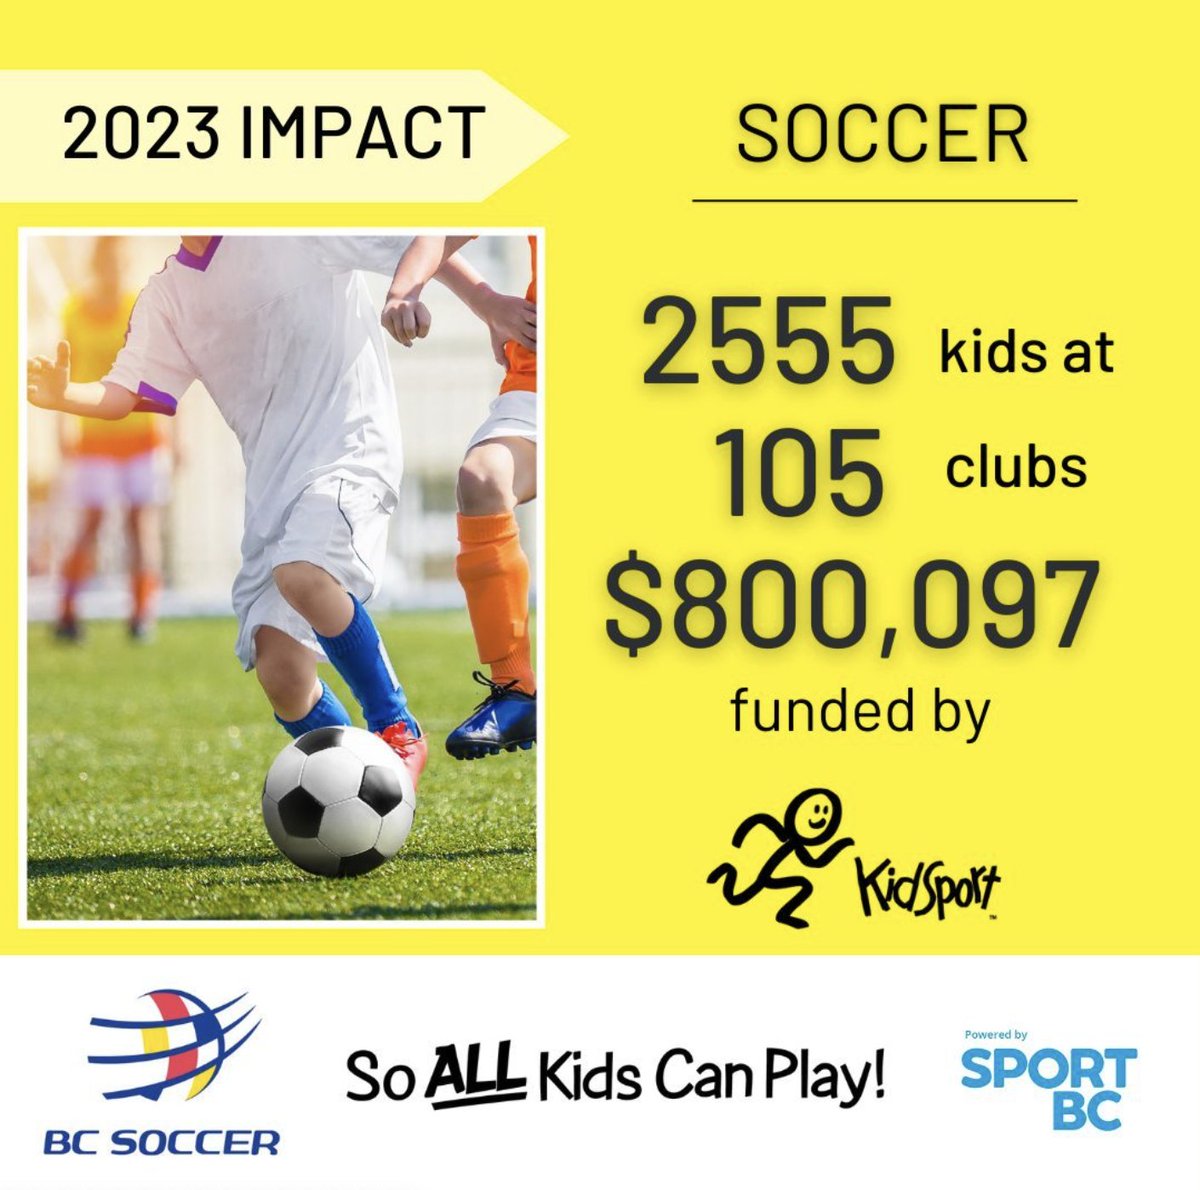 Throughout 2023, BC Soccer continued its partnership with @kidsportbc, donating $25,000 to fund soccer grants throughout 2023!⚽️🇨🇦

For BC Soccer's full 2023 Impact Report: bcsoccer.net/media/zrshbmzh…

#BCSA #SoALLKidsCanPlay